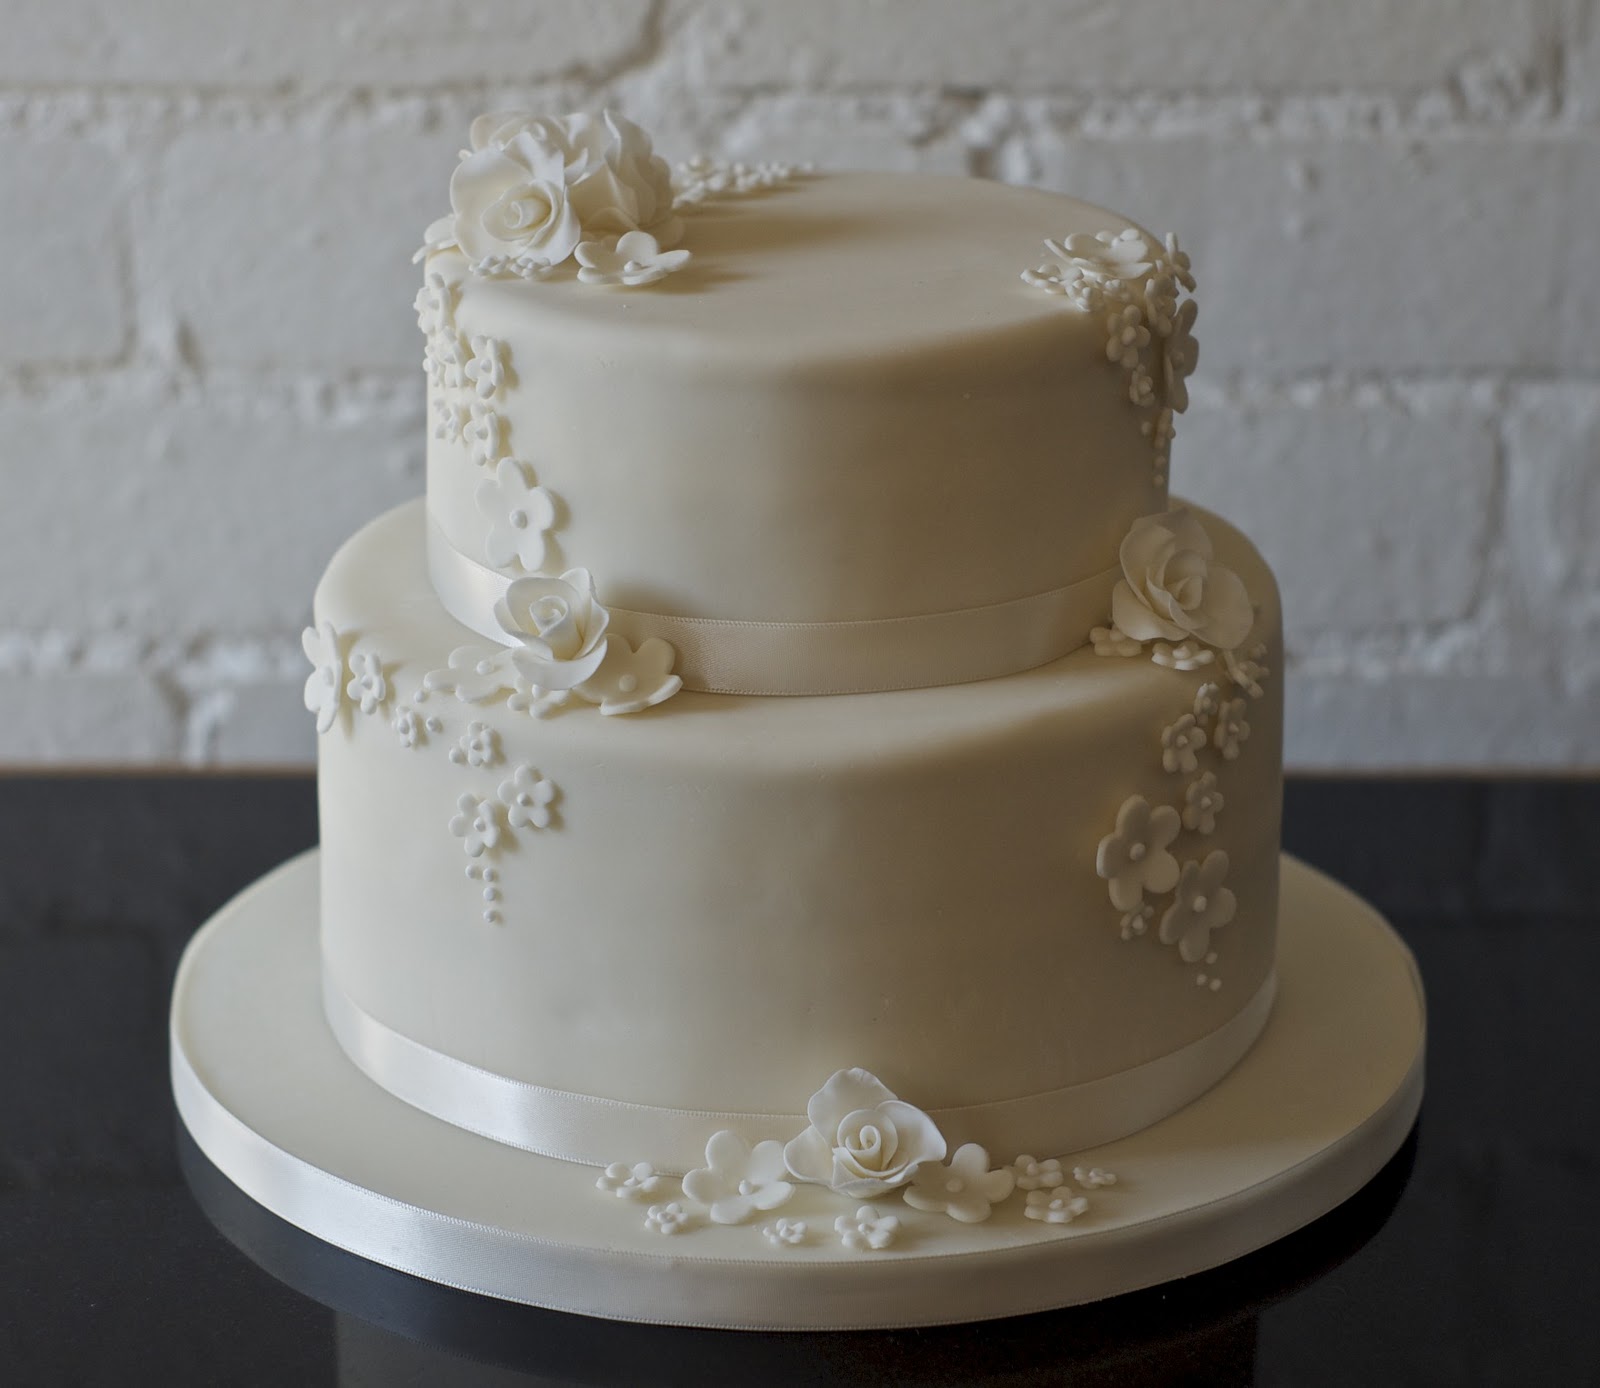 REAL LIFE: Rose and blossom 2 tier wedding cake